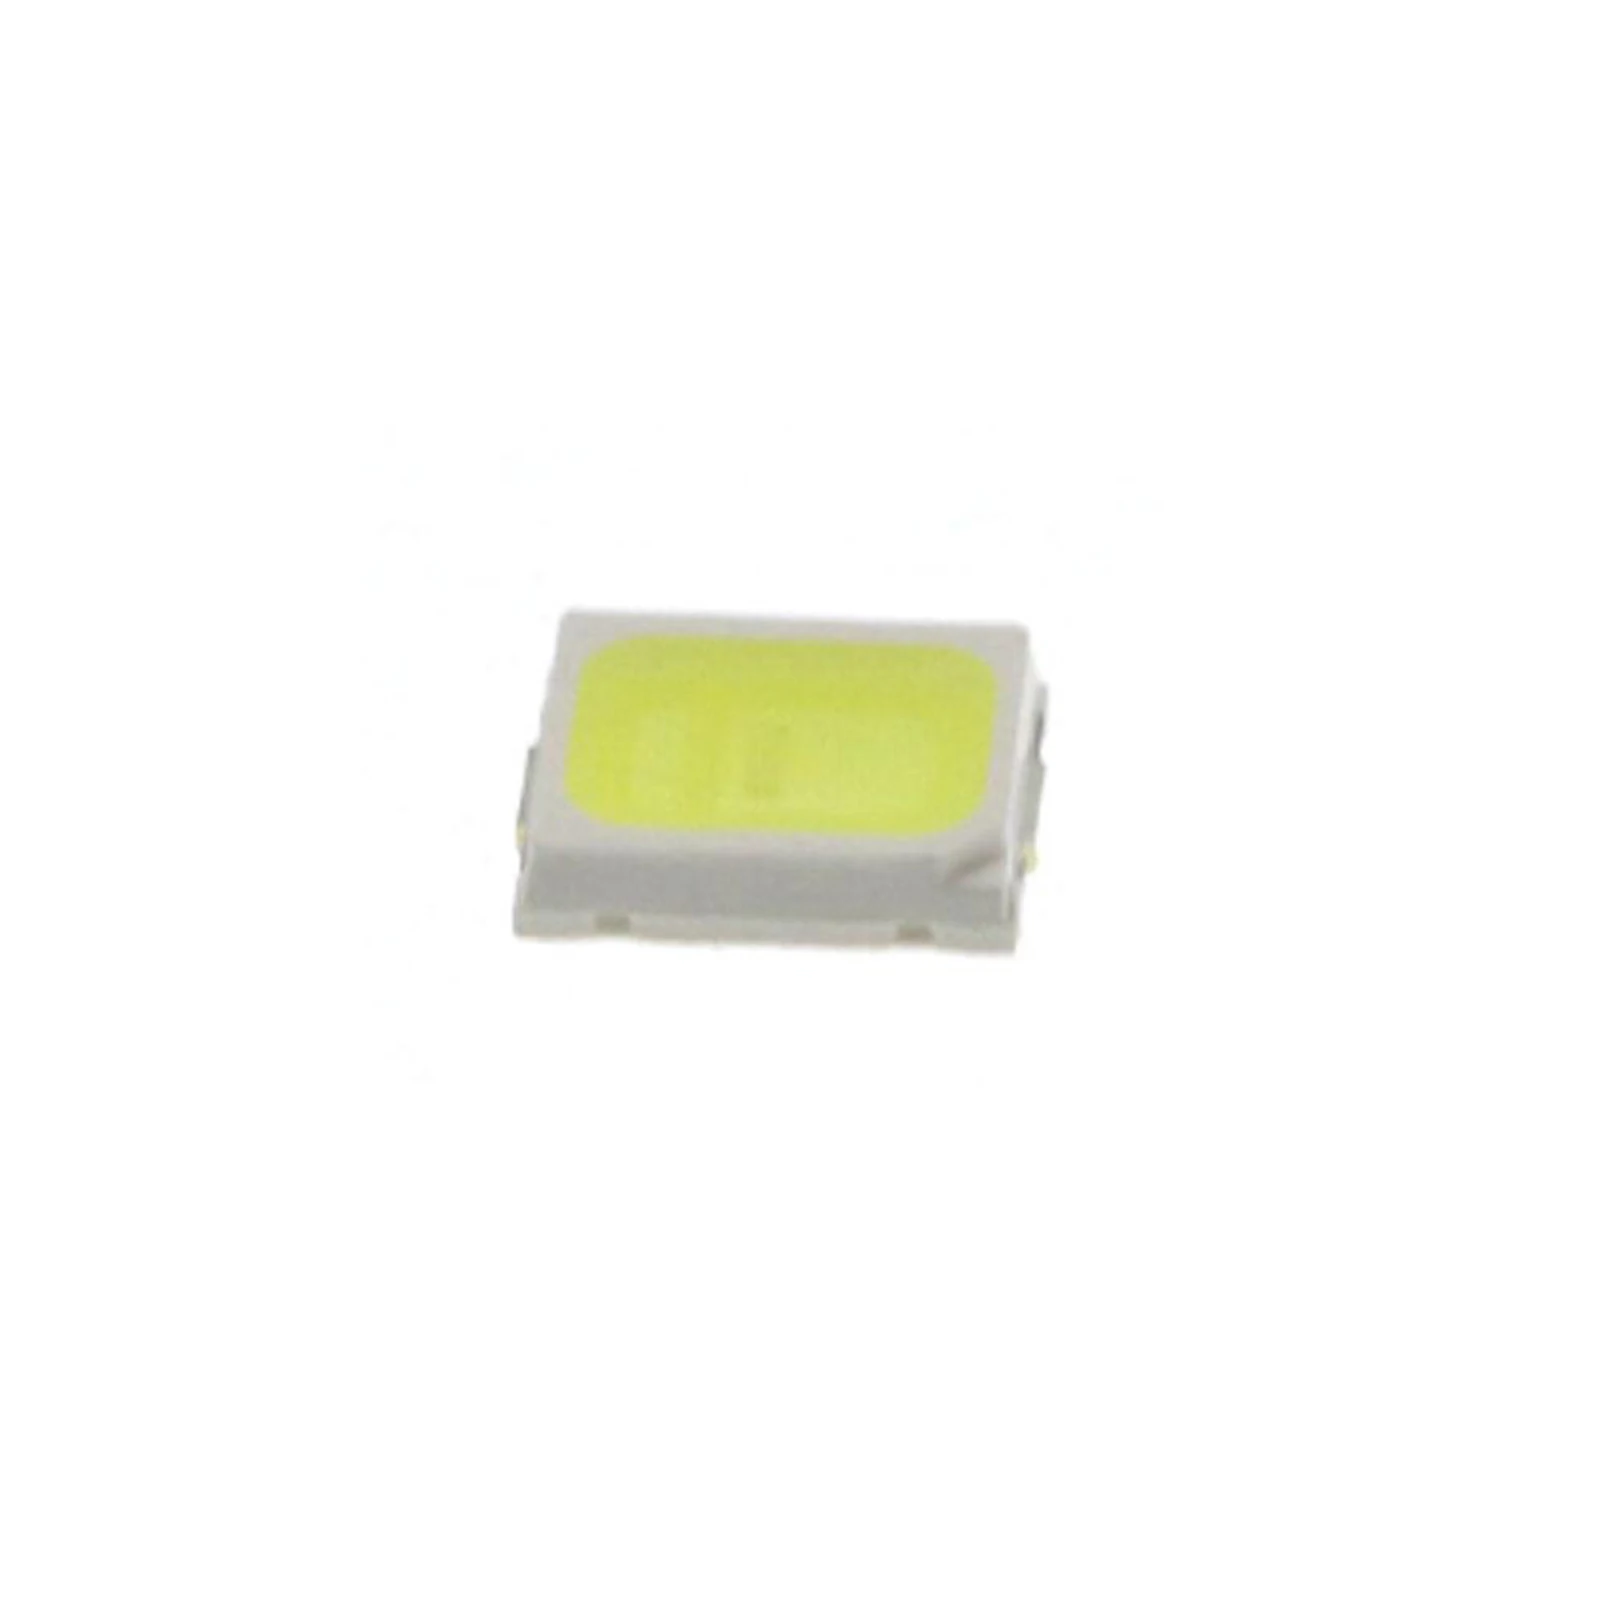 100 PIECES SMD 3528 LED Diode Lights Small-chip 5W High-Power Cool White LE